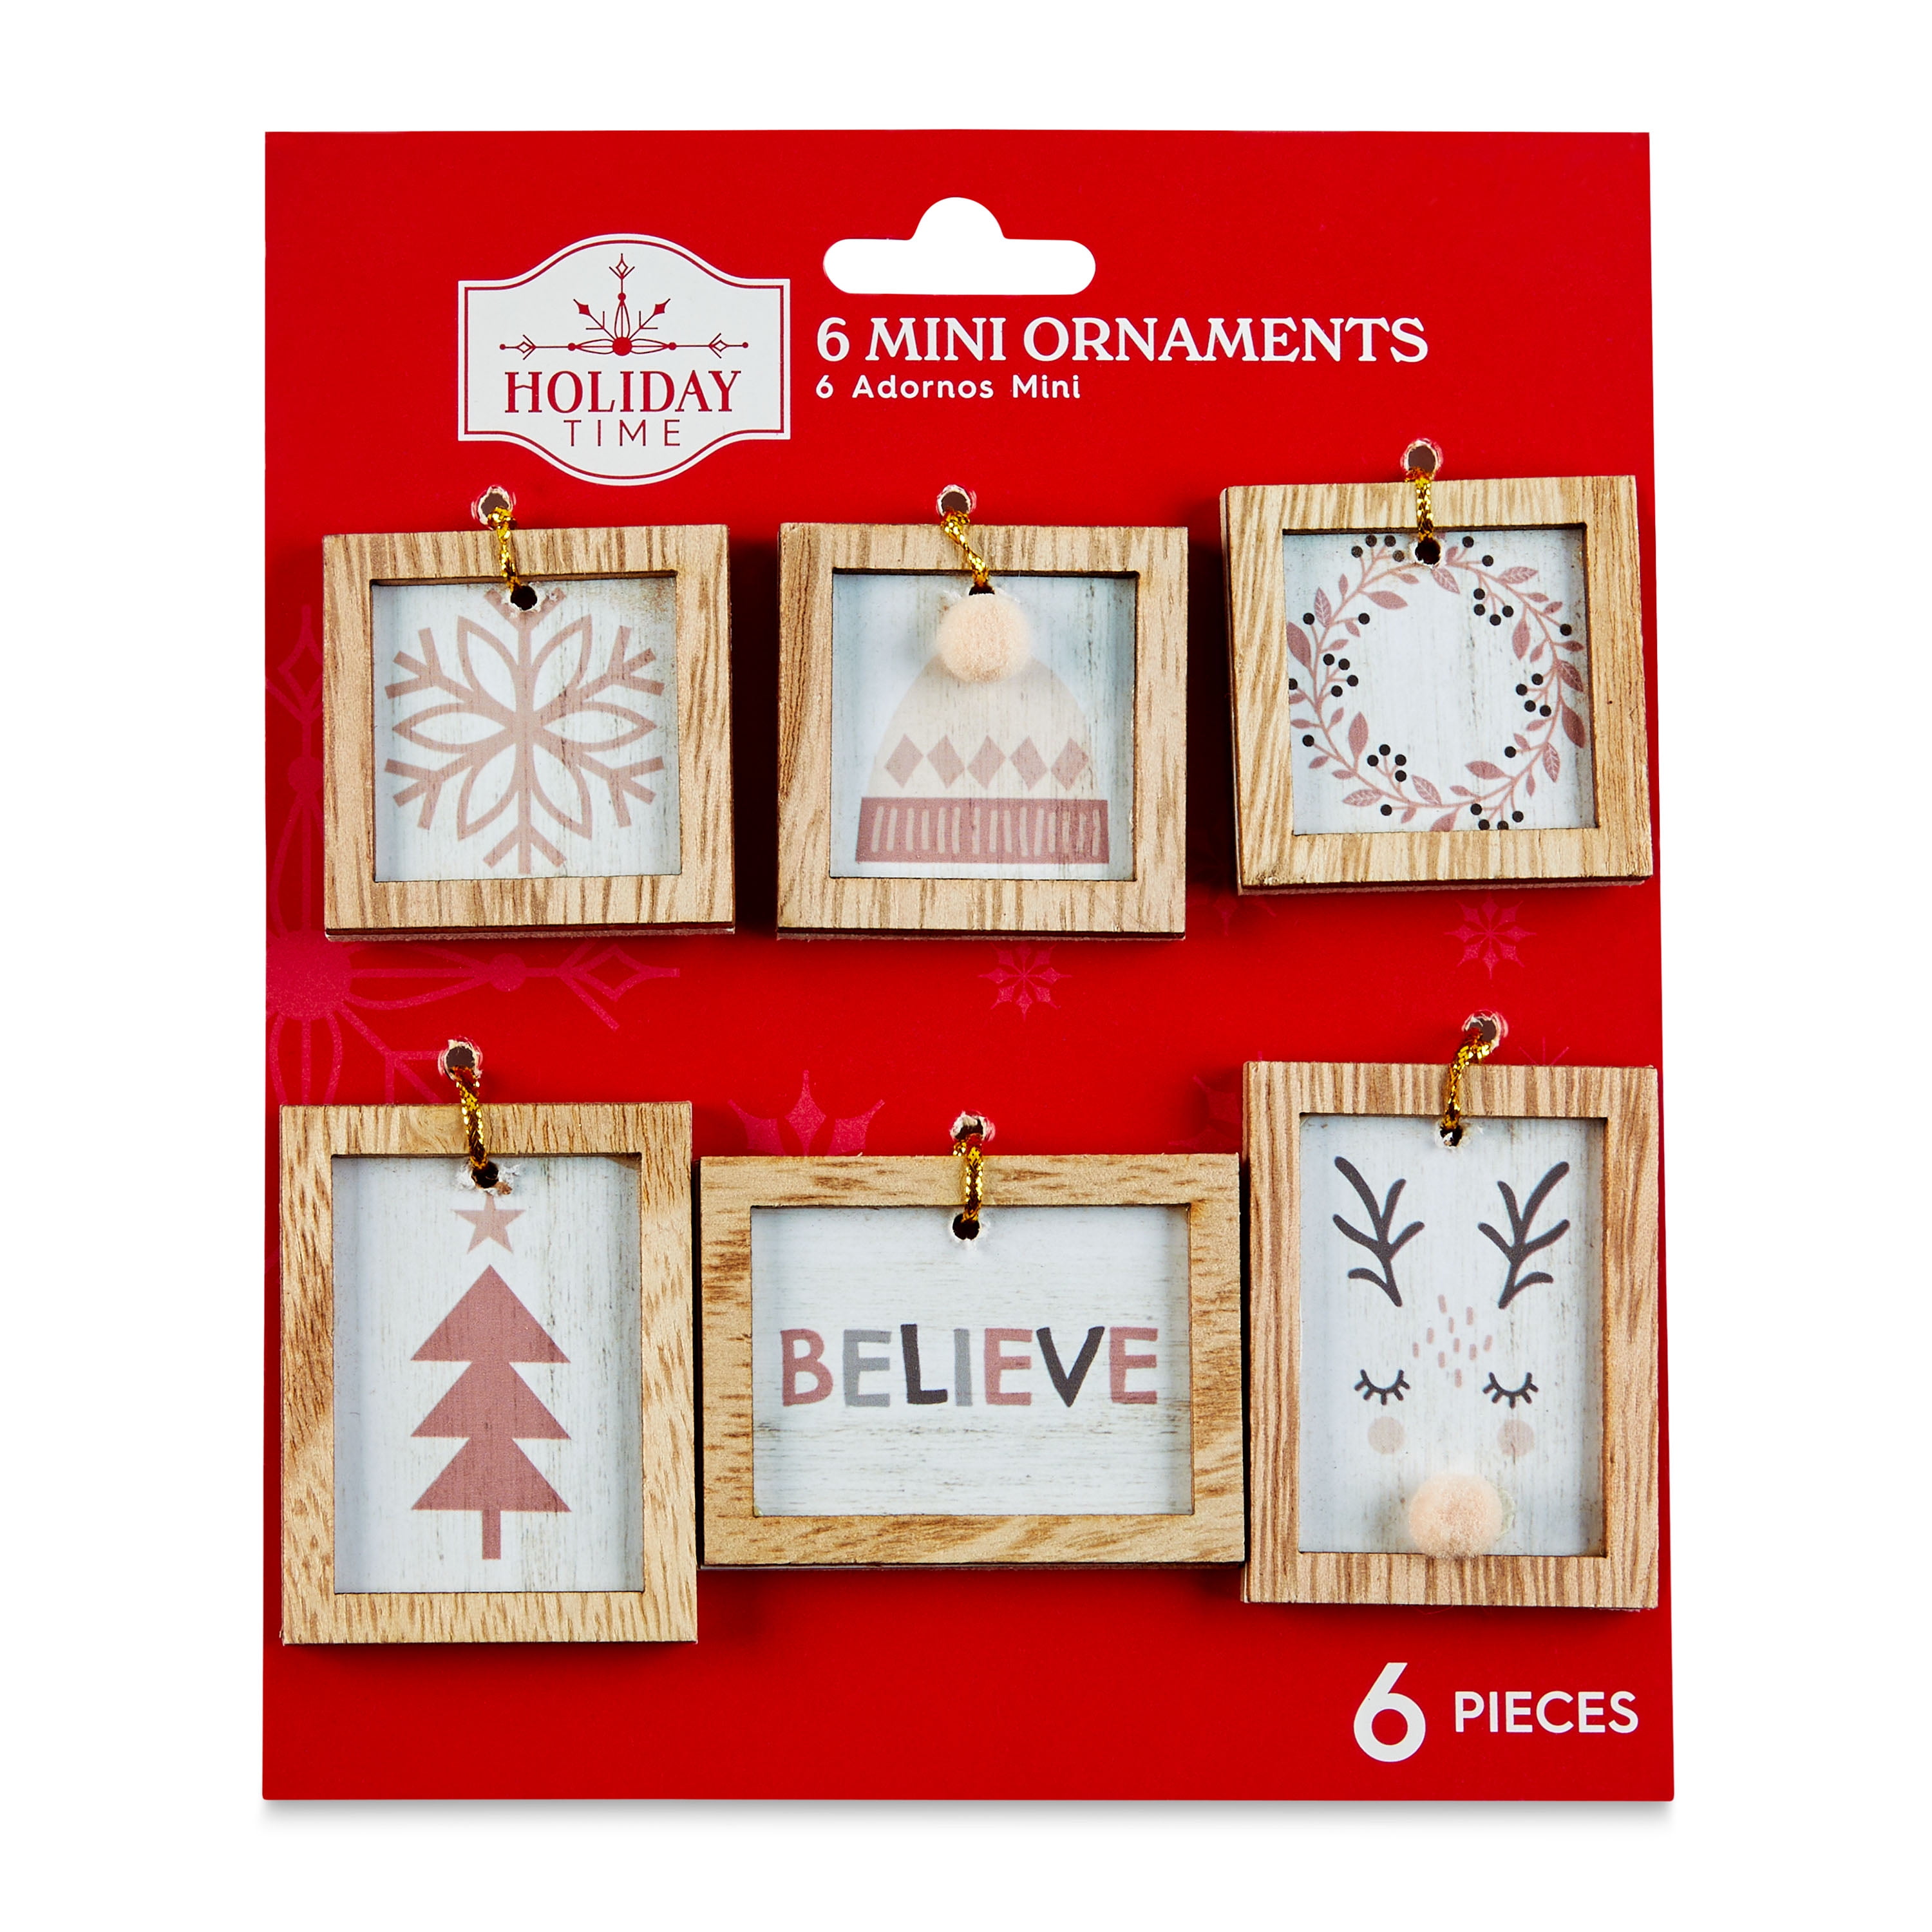 Holiday Time Christmas Tree Mini Ornaments, Frames, 6 Count